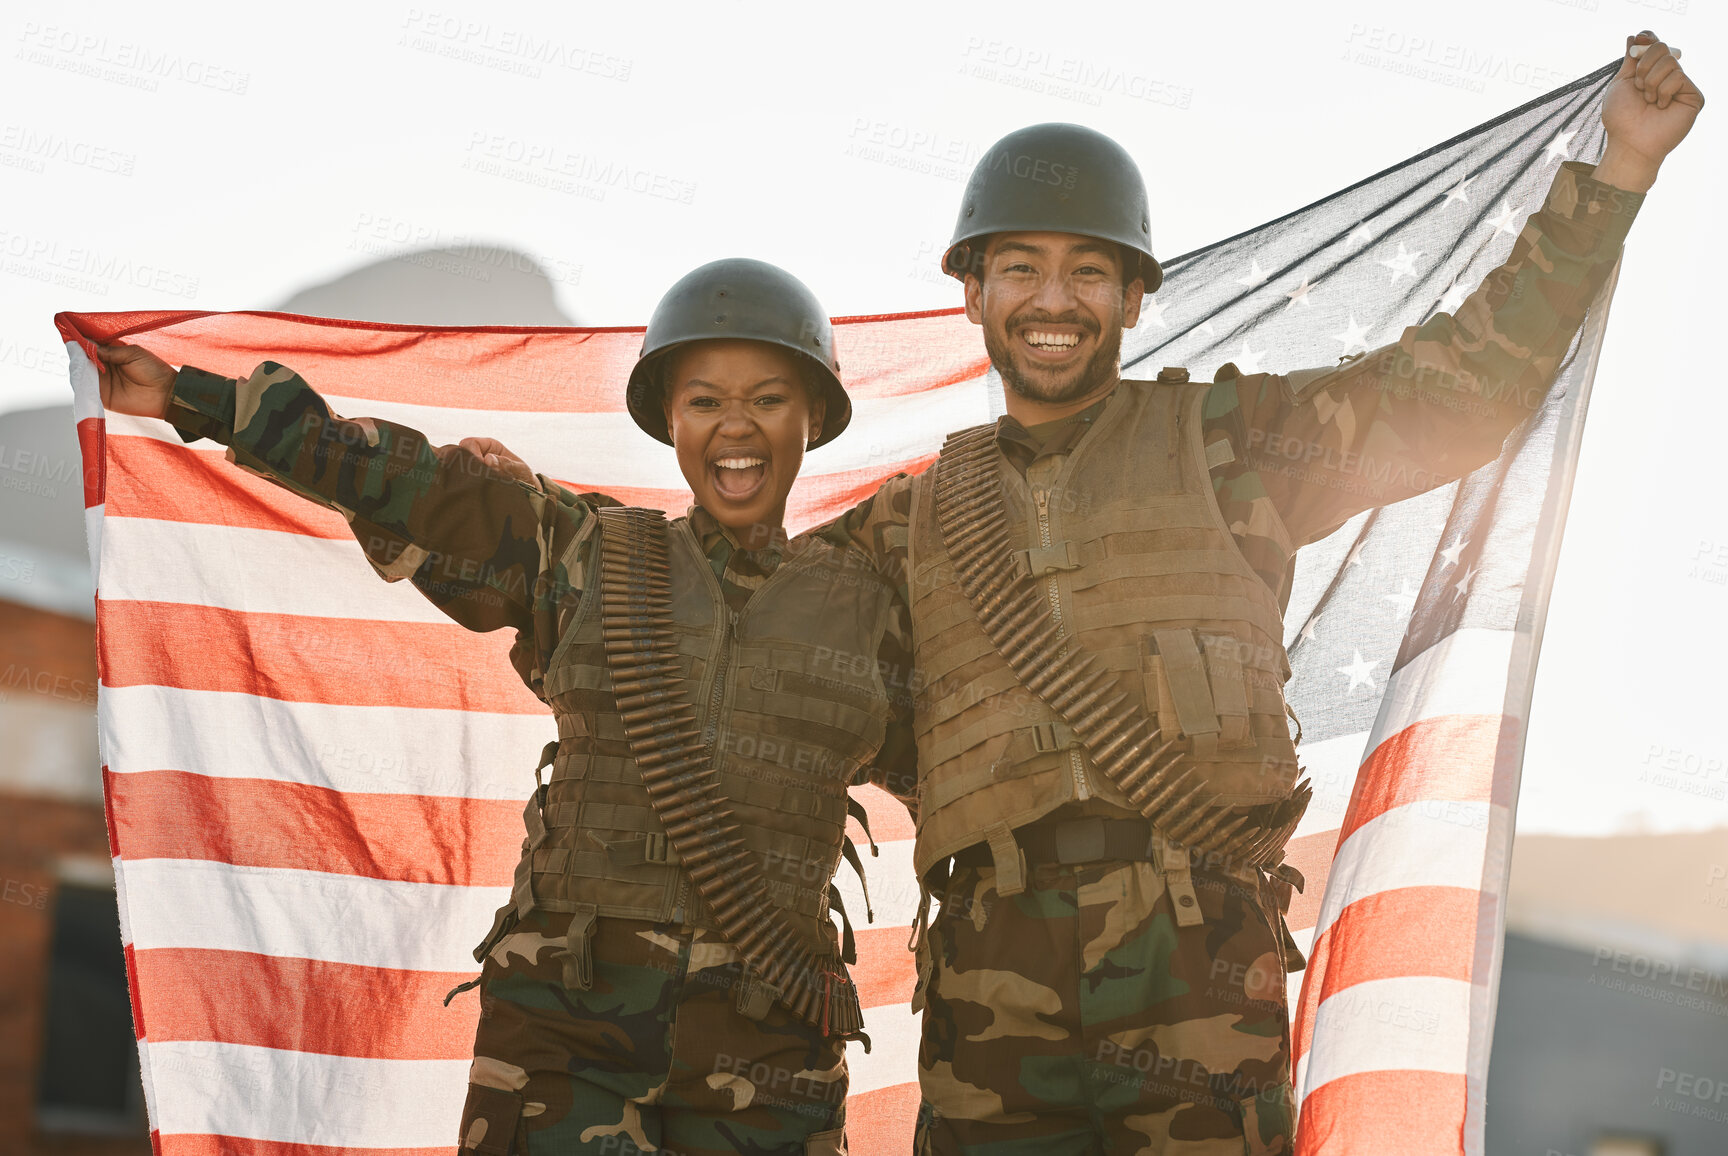 Buy stock photo Army, portrait of man and woman with American flag, solidarity and team pride together at war time. Smile, happiness and soldier partnership, people with patriot service in military uniform for USA.